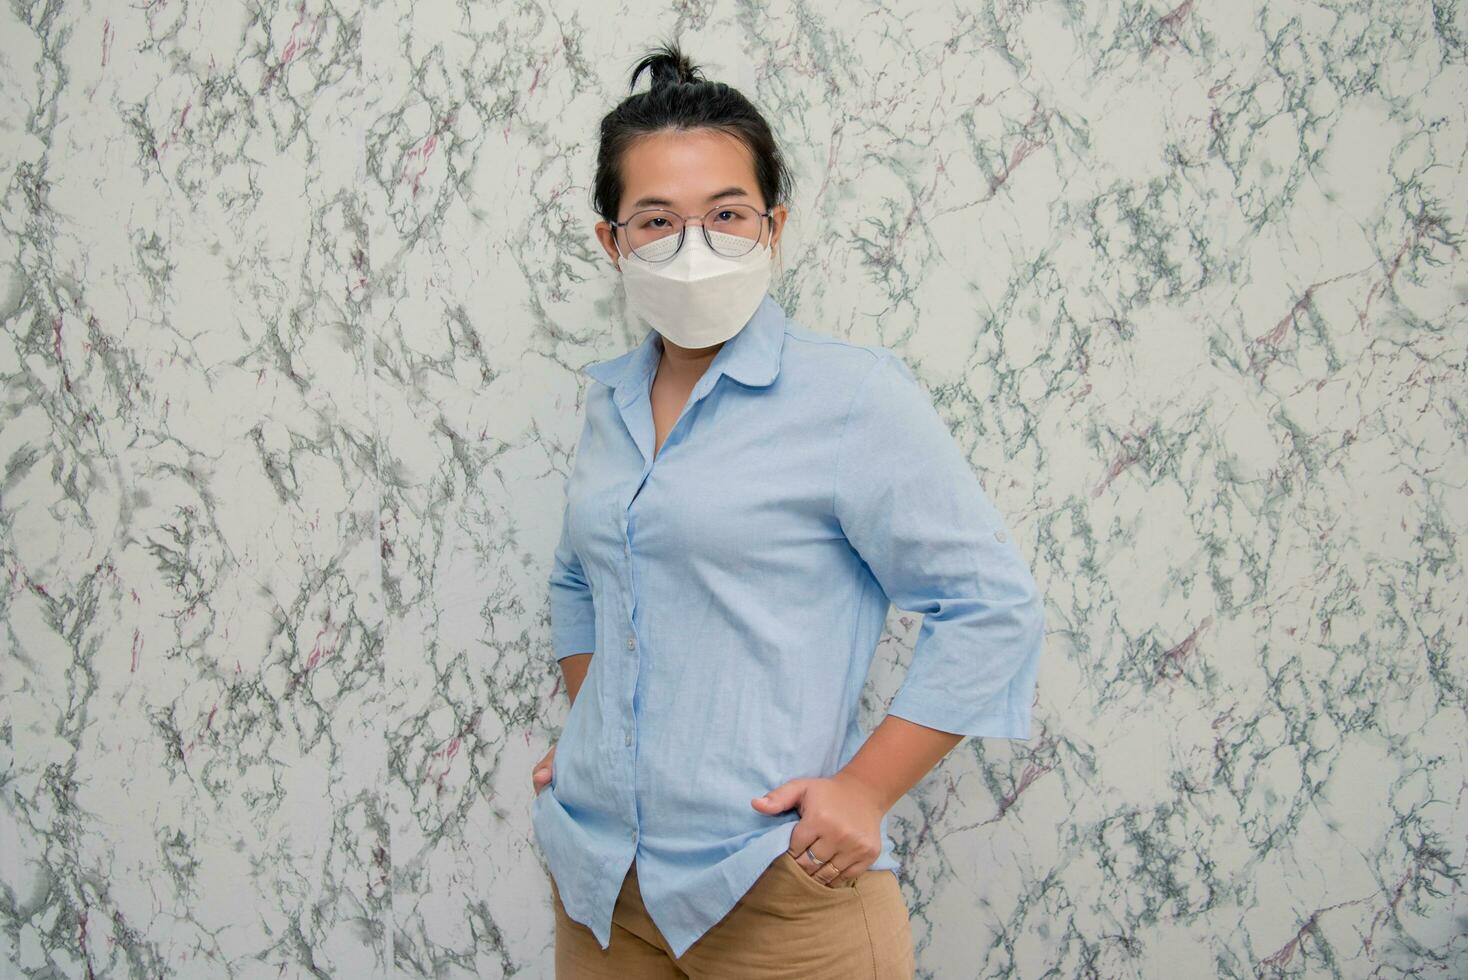 Teacher Mask Stock Photos, Images and Backgrounds for Free Download